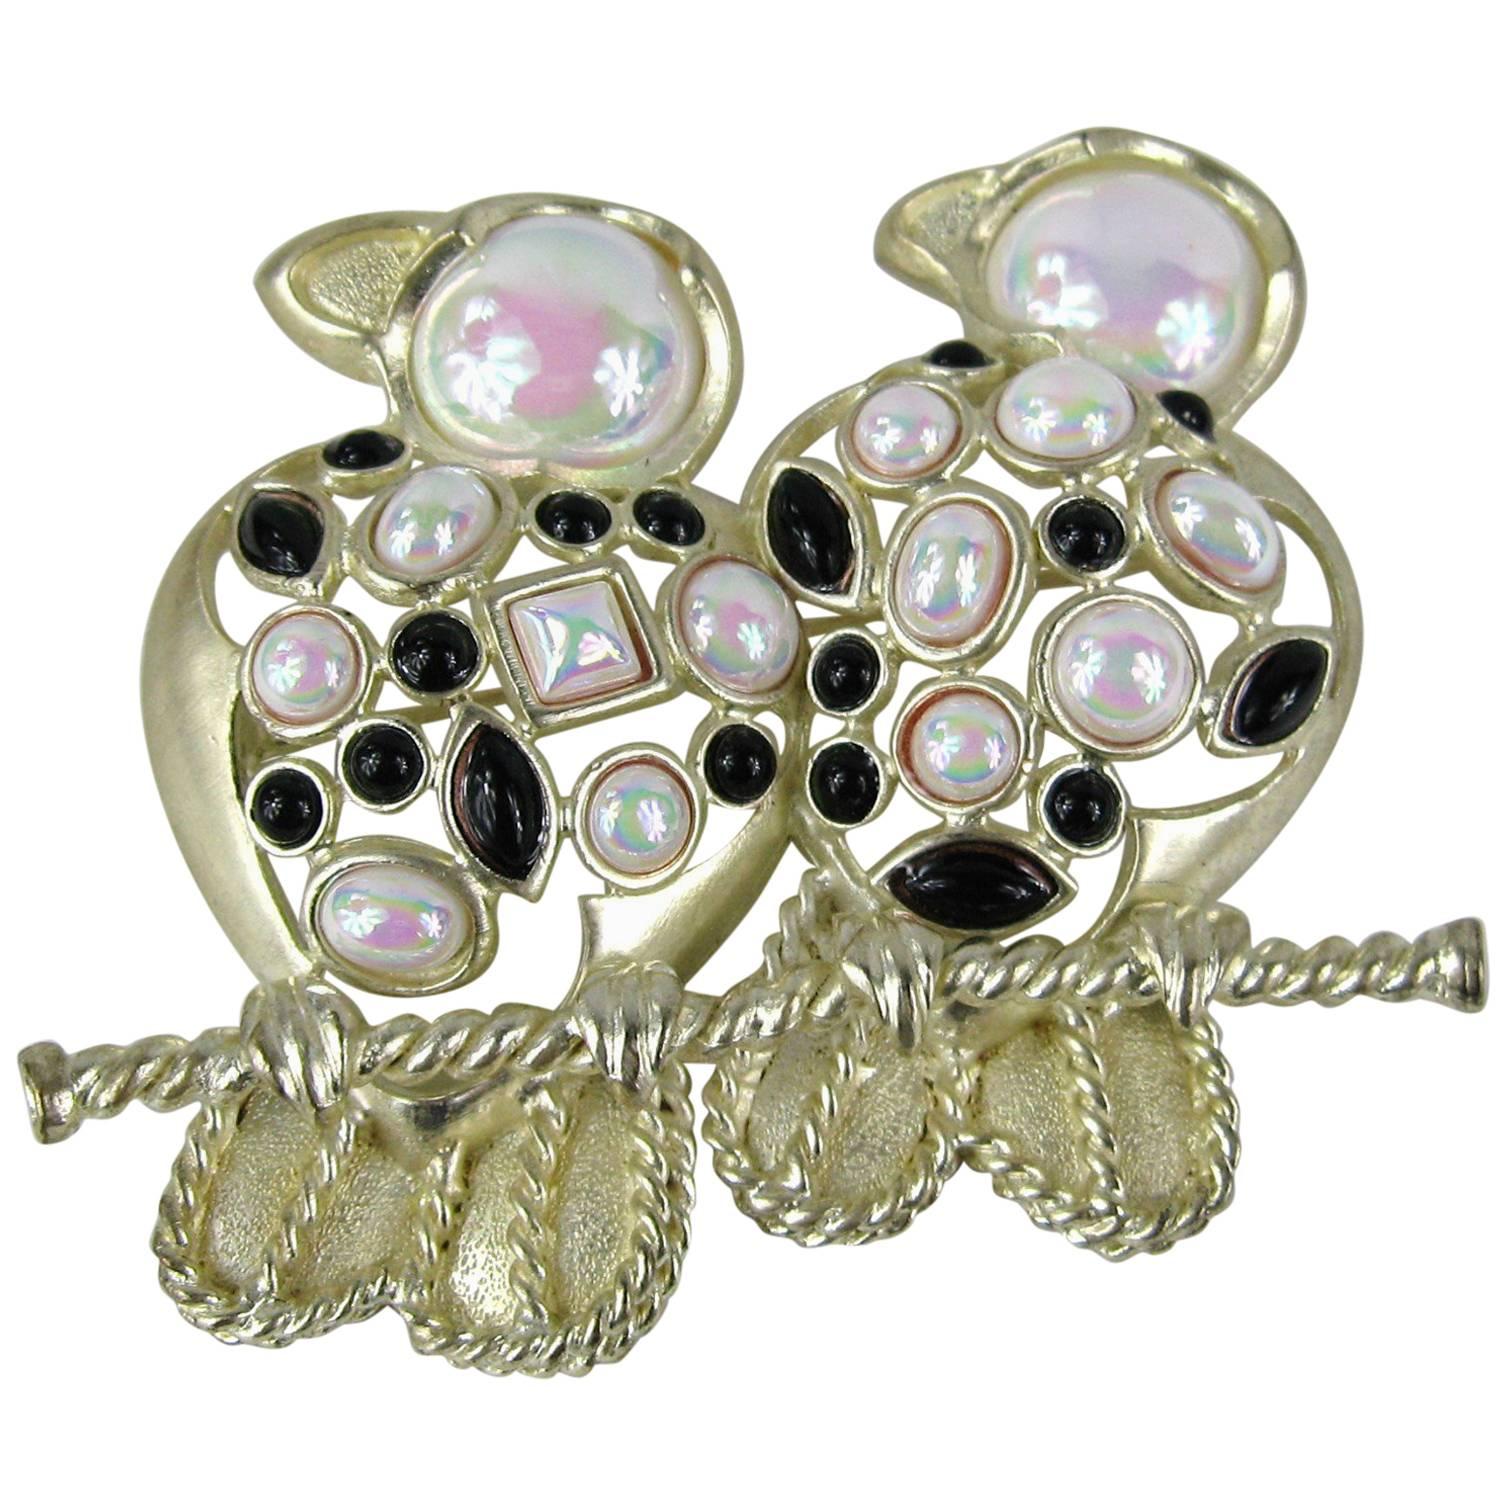 Pearl Love Birds Brooch perched on Branch Pin 1980s For Sale